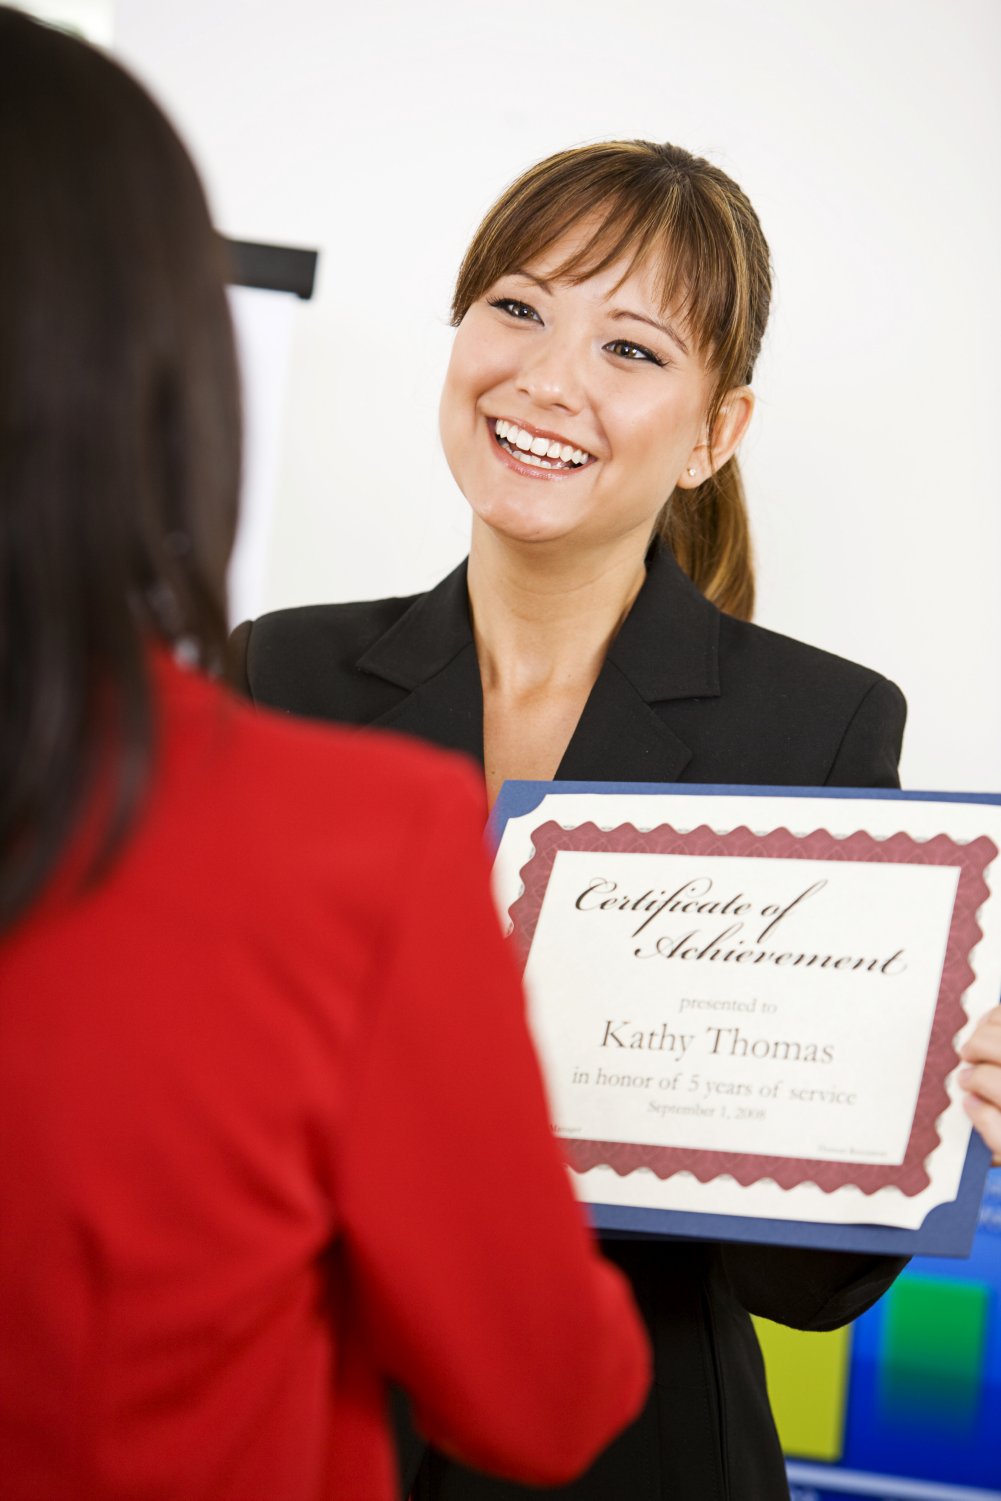 Certificates are an easy, low cost Service Anniversary Award